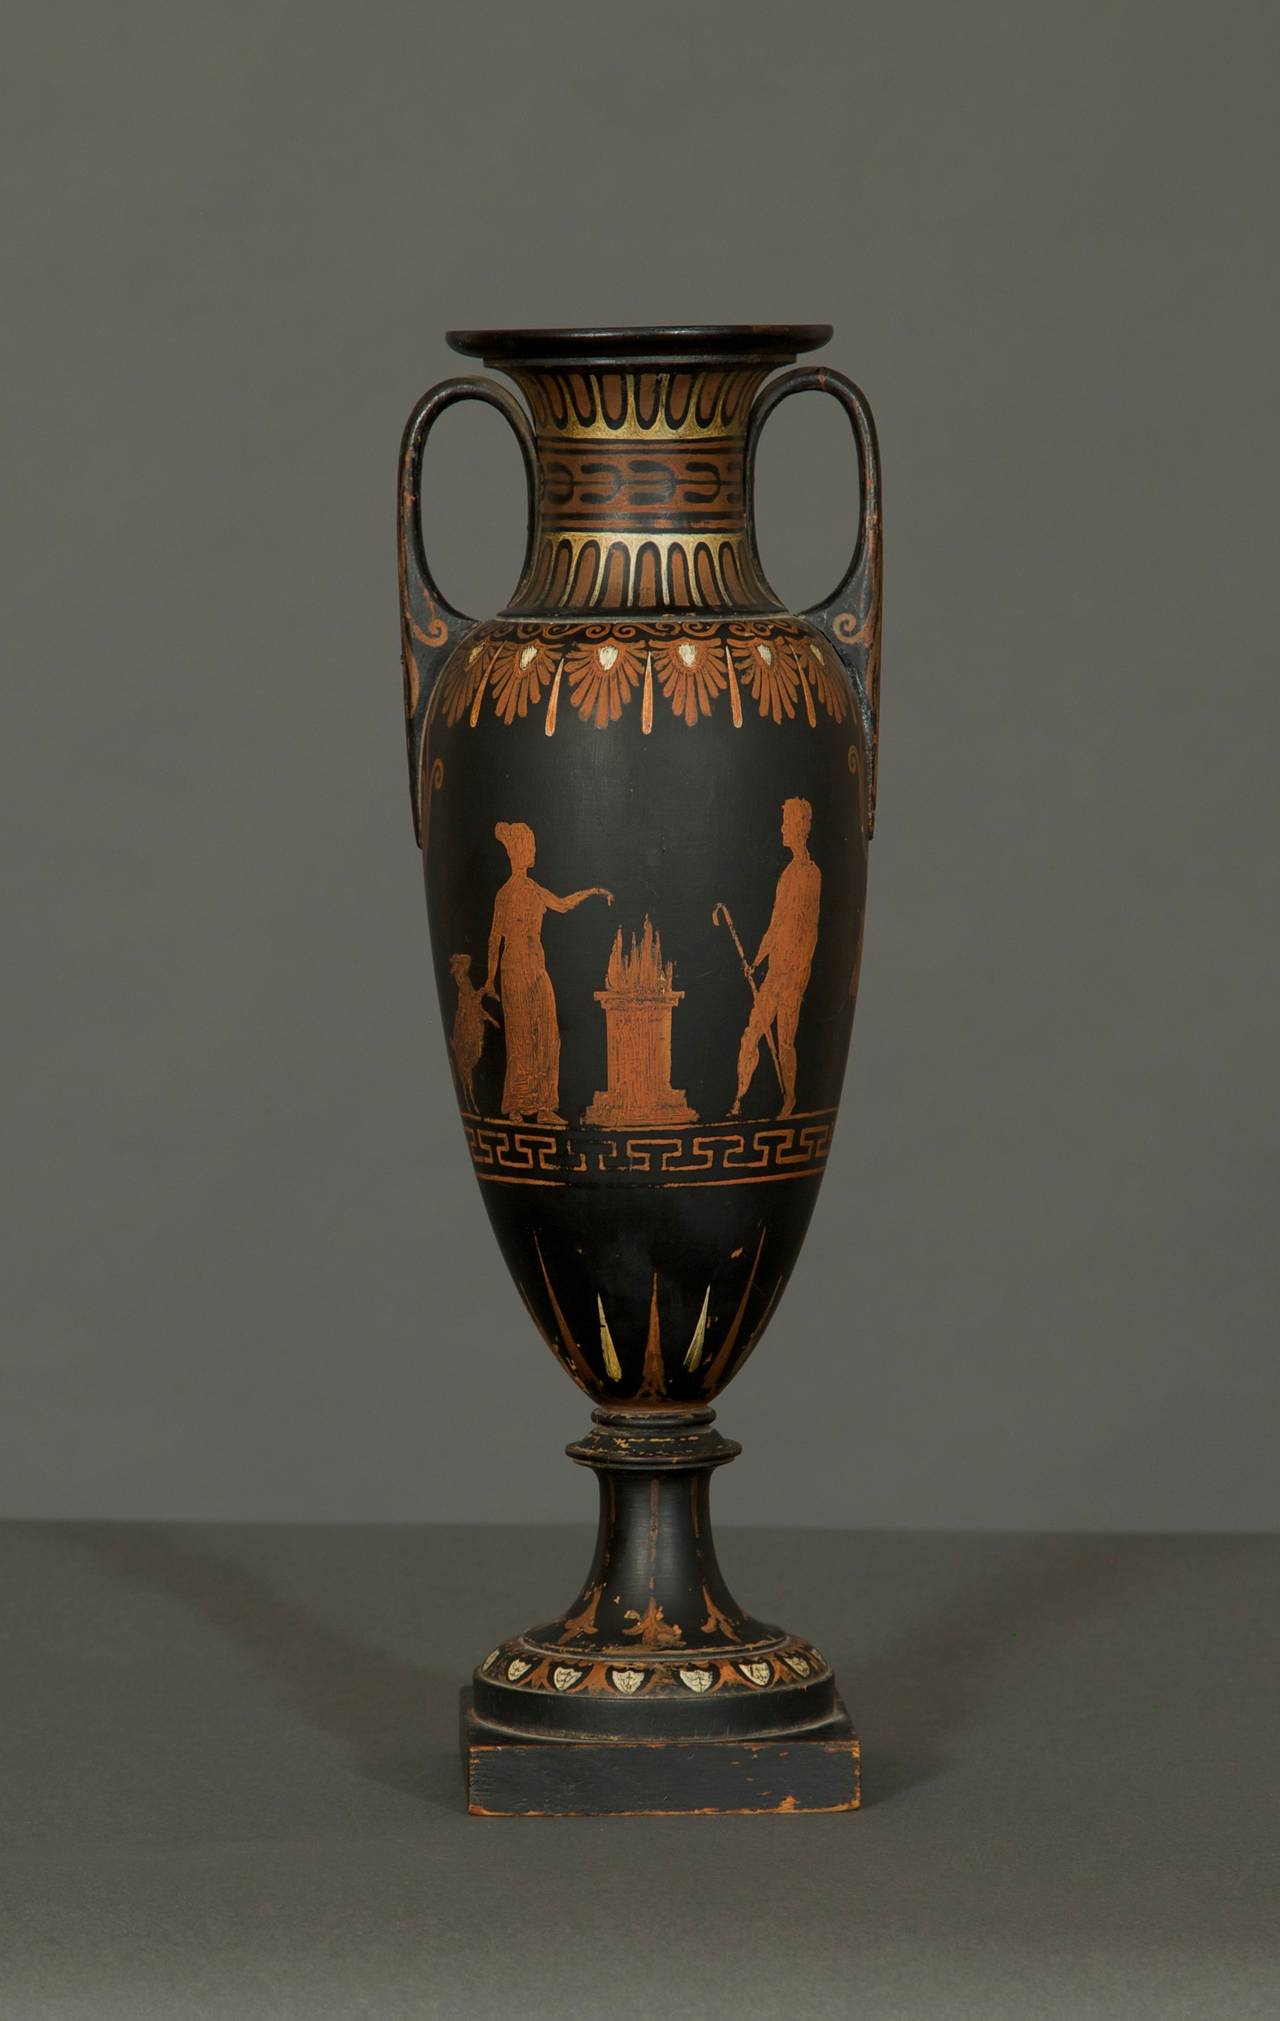 Of black and red painted wood simulating Greek red figure pottery in the form of an Amphora, depicting animals and figures performing a sacrifice. Detailed research report available on request.